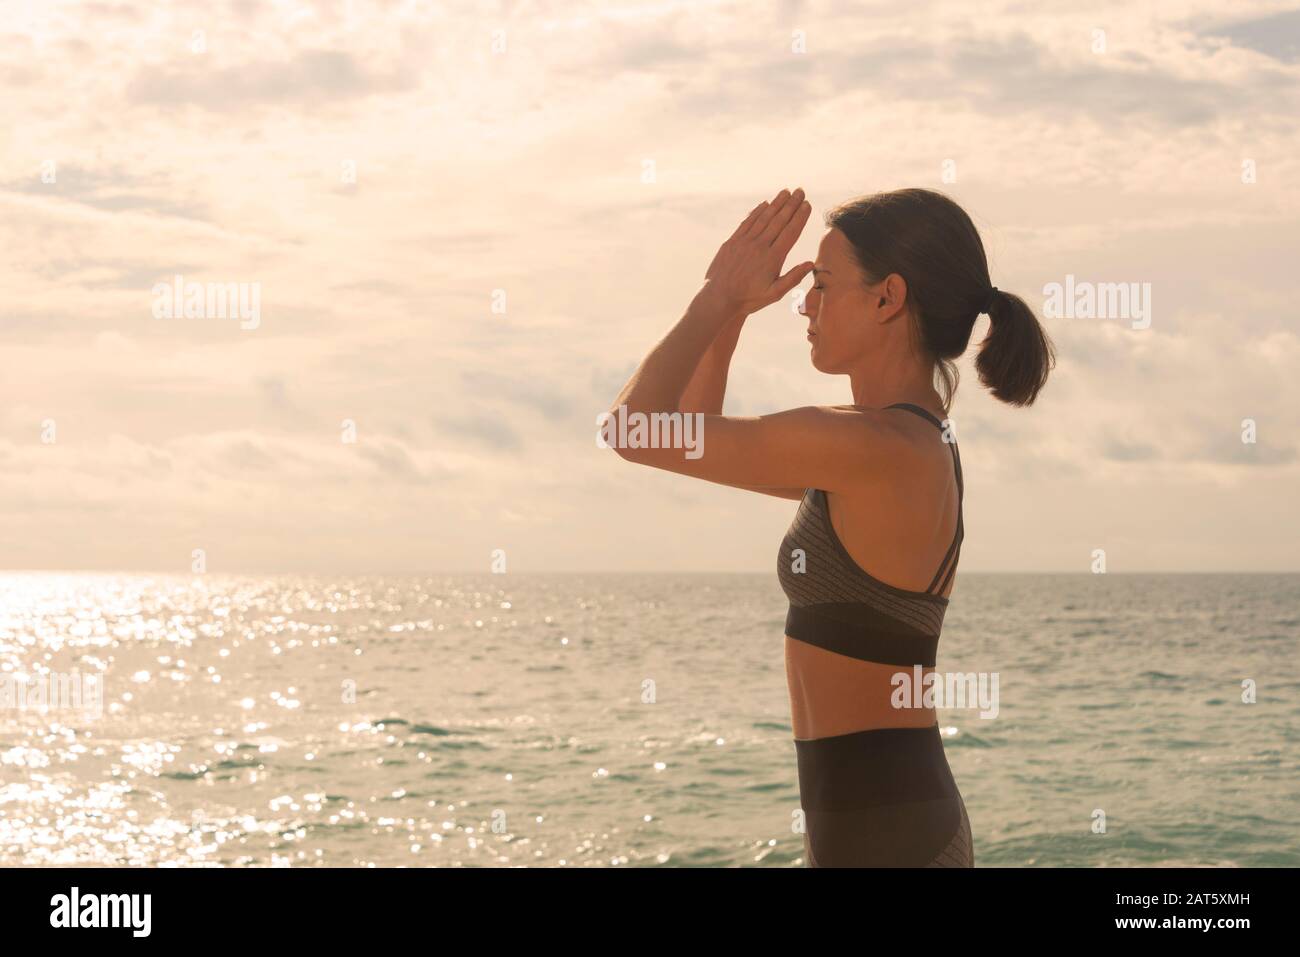 Woman Meditating by the ocean, Yoga Poses Prayer To The Third Eye Stock Photo